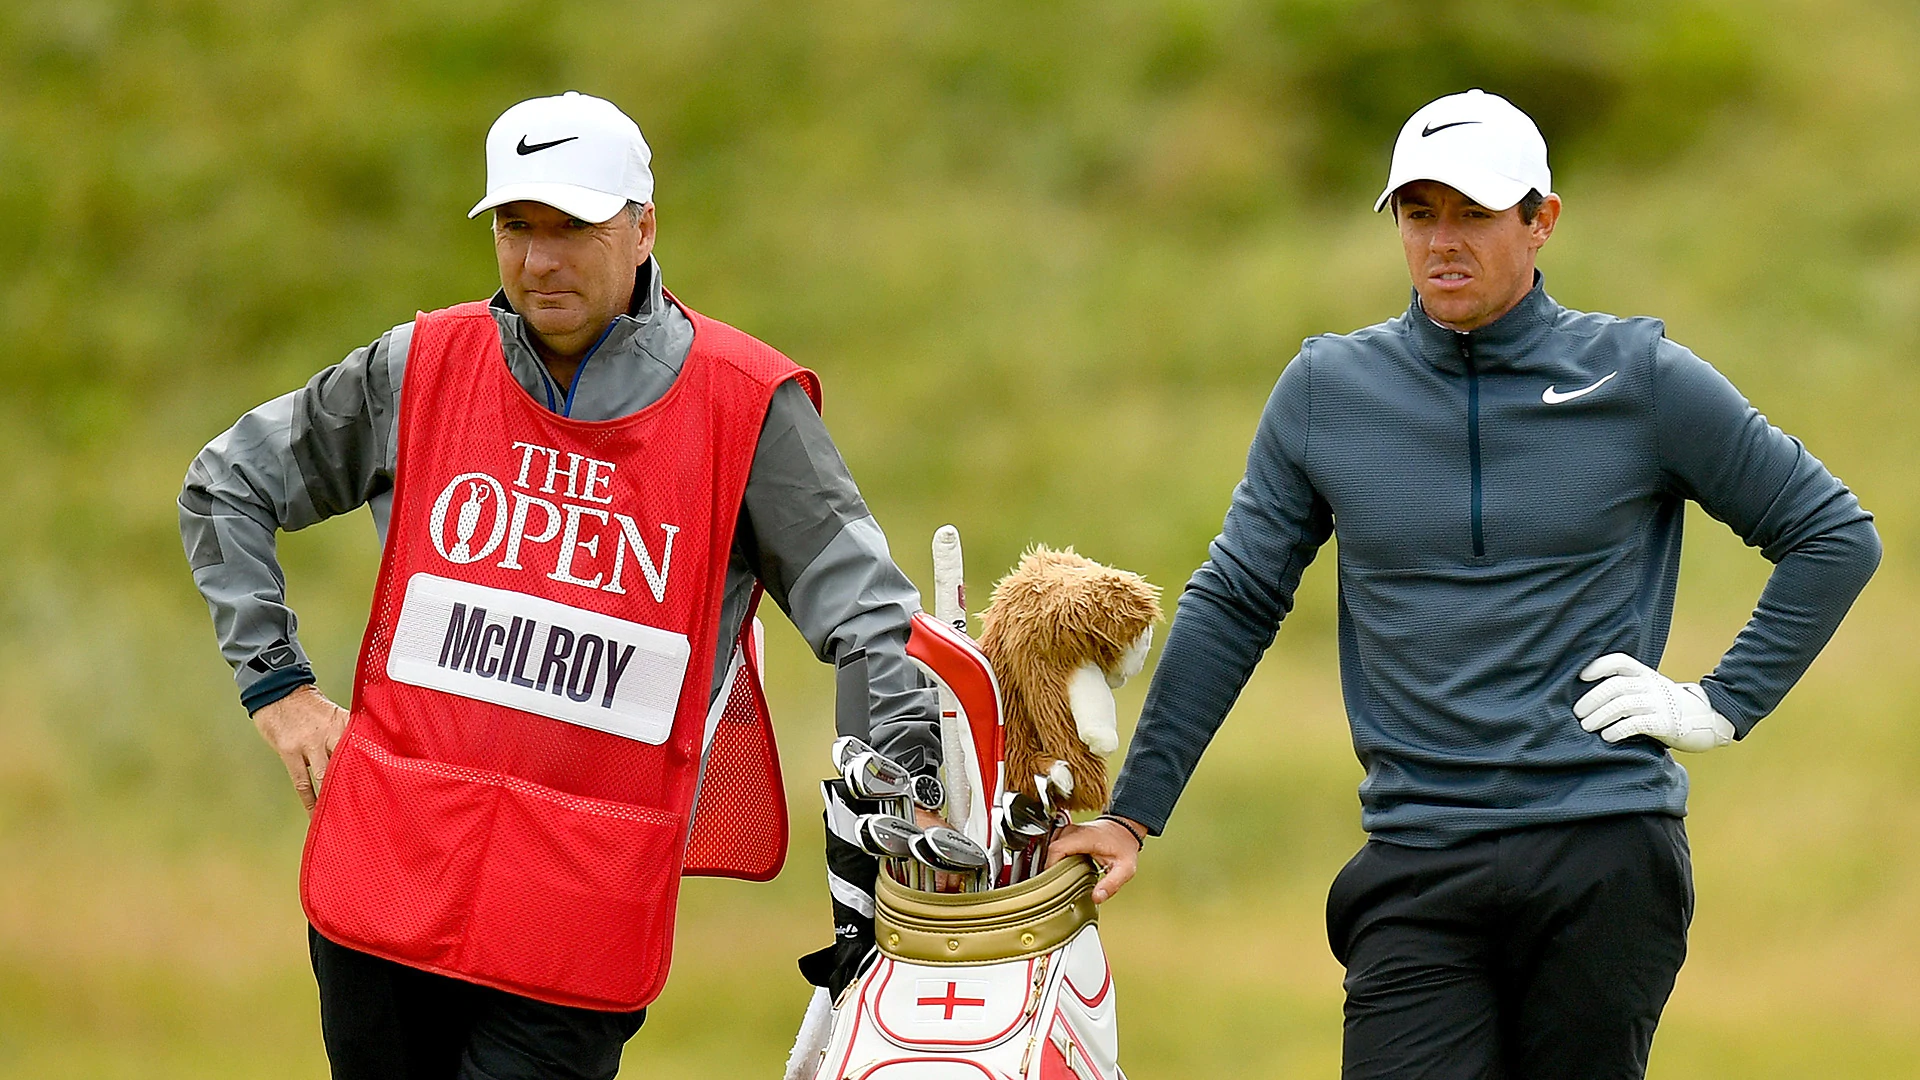 Report: McIlroy splits with longtime caddie Fitzgerald